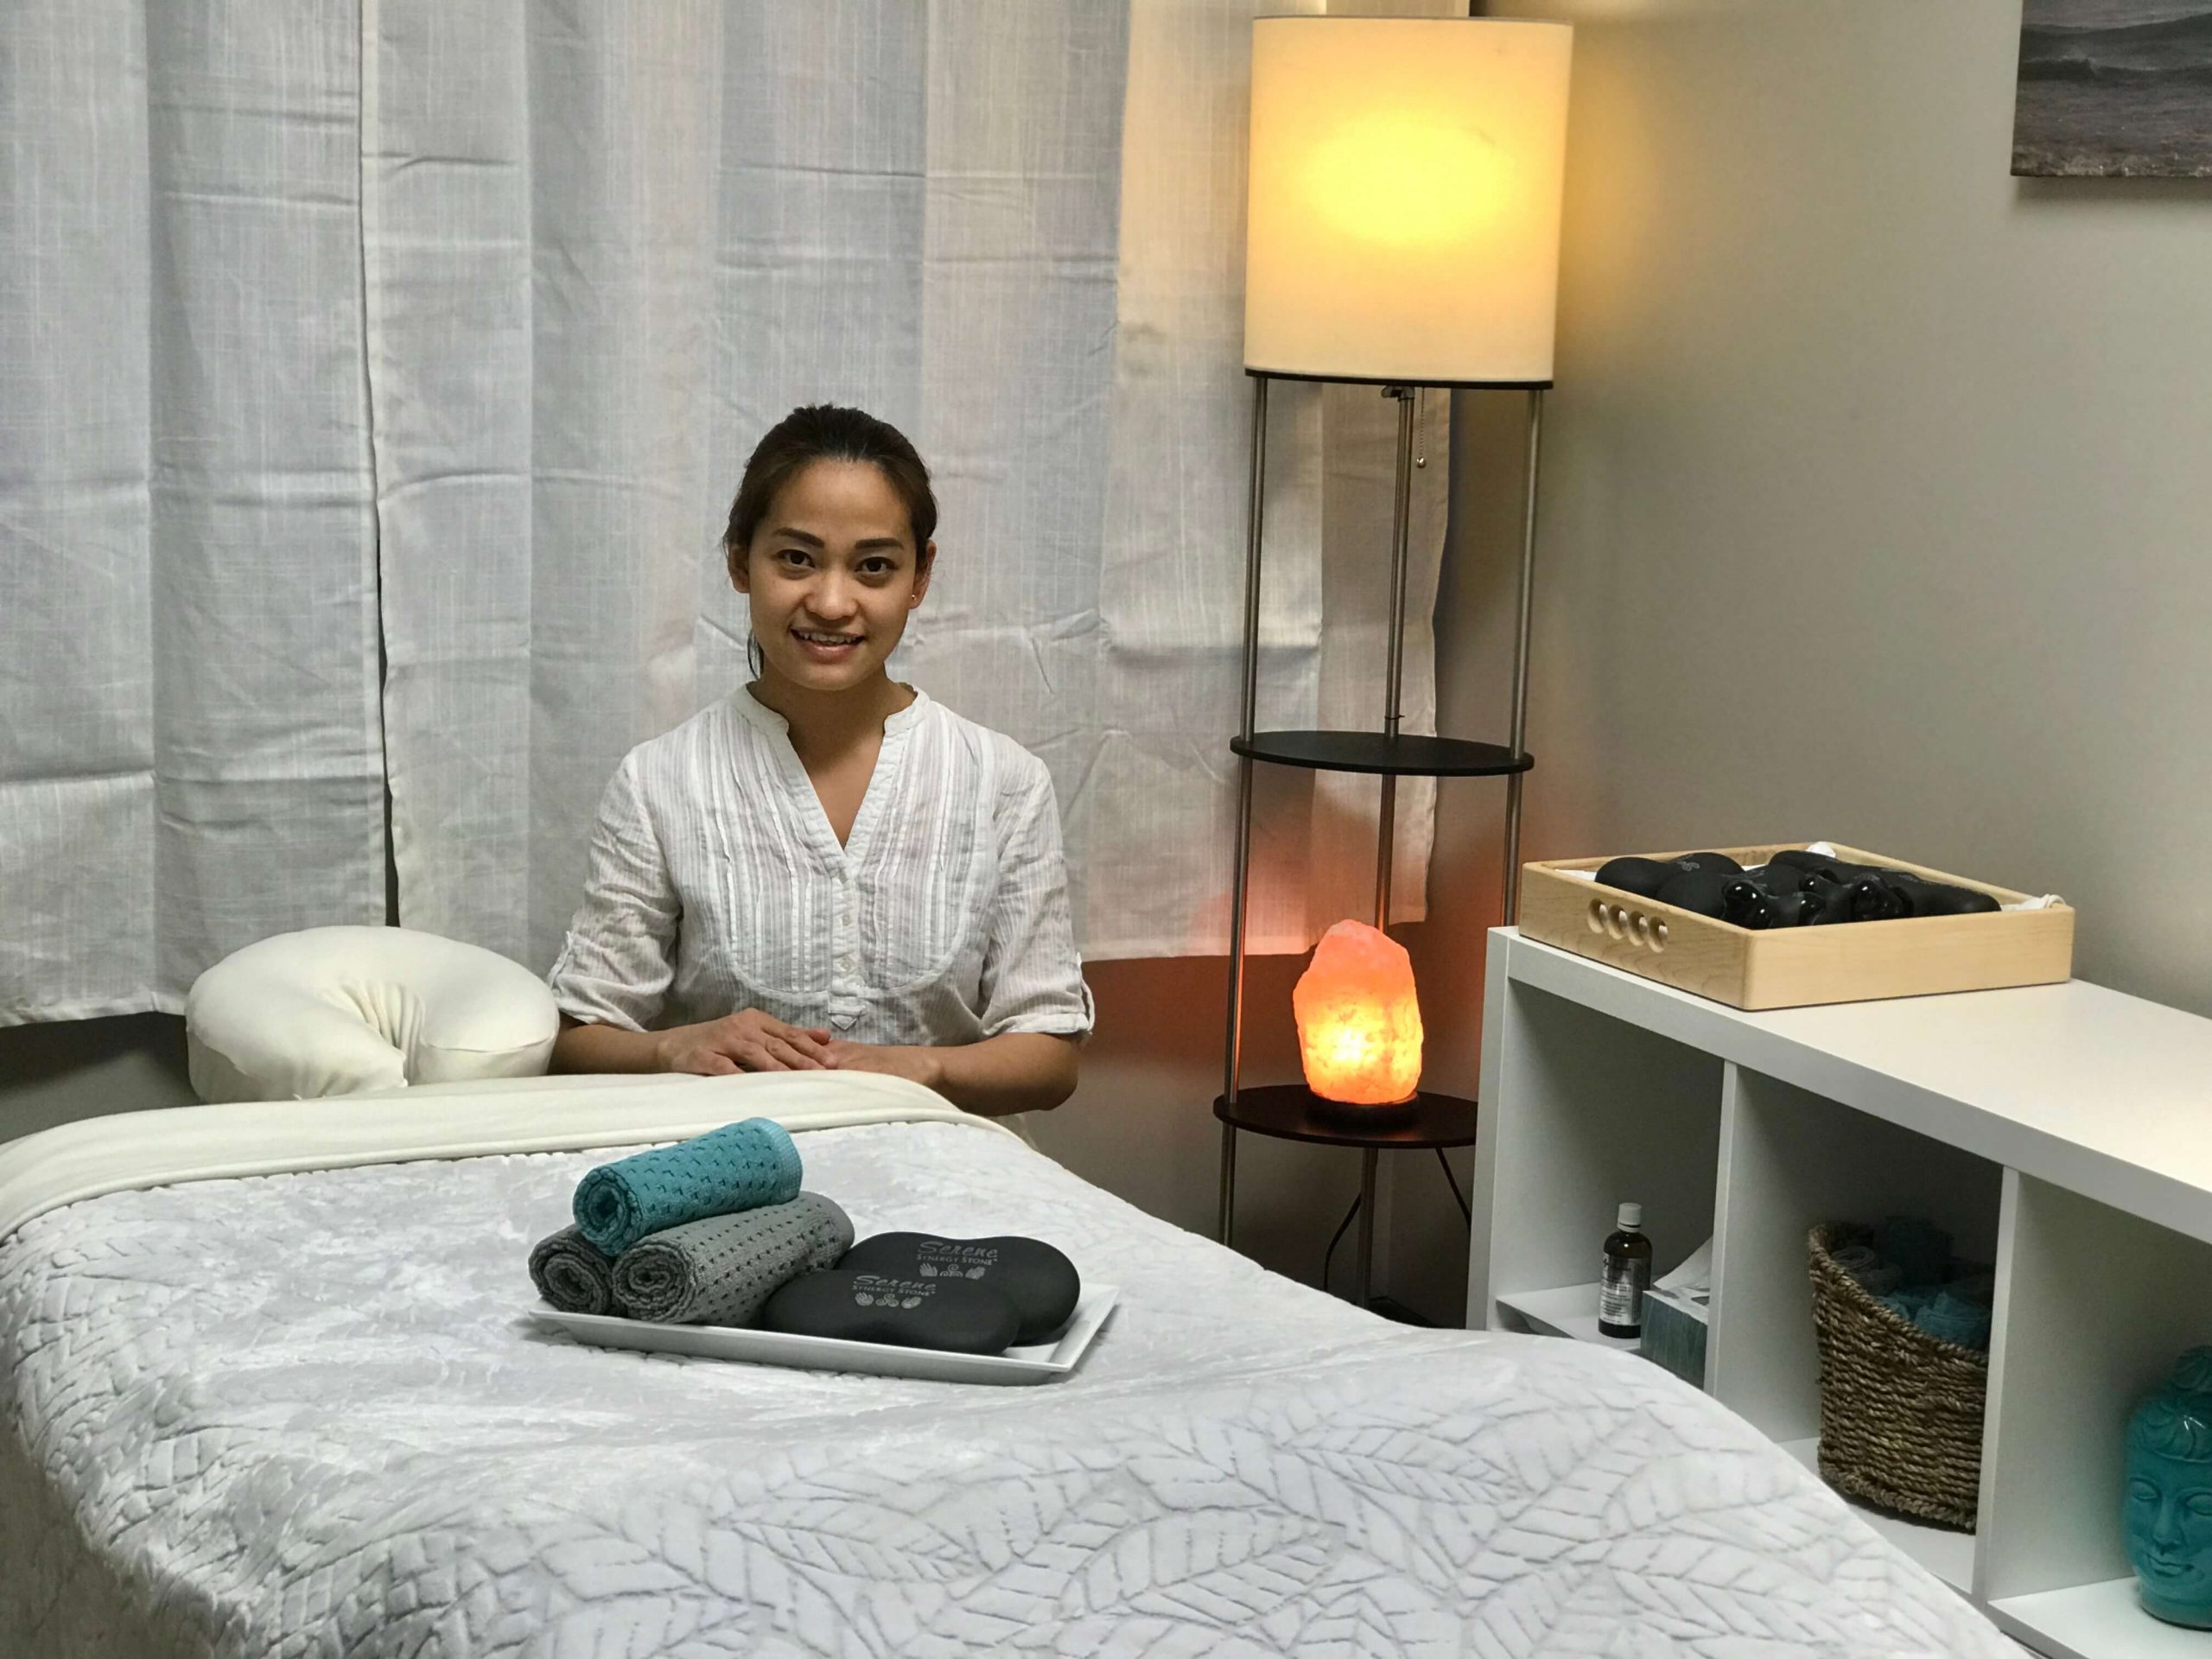 massage therapy | Lianna at her table